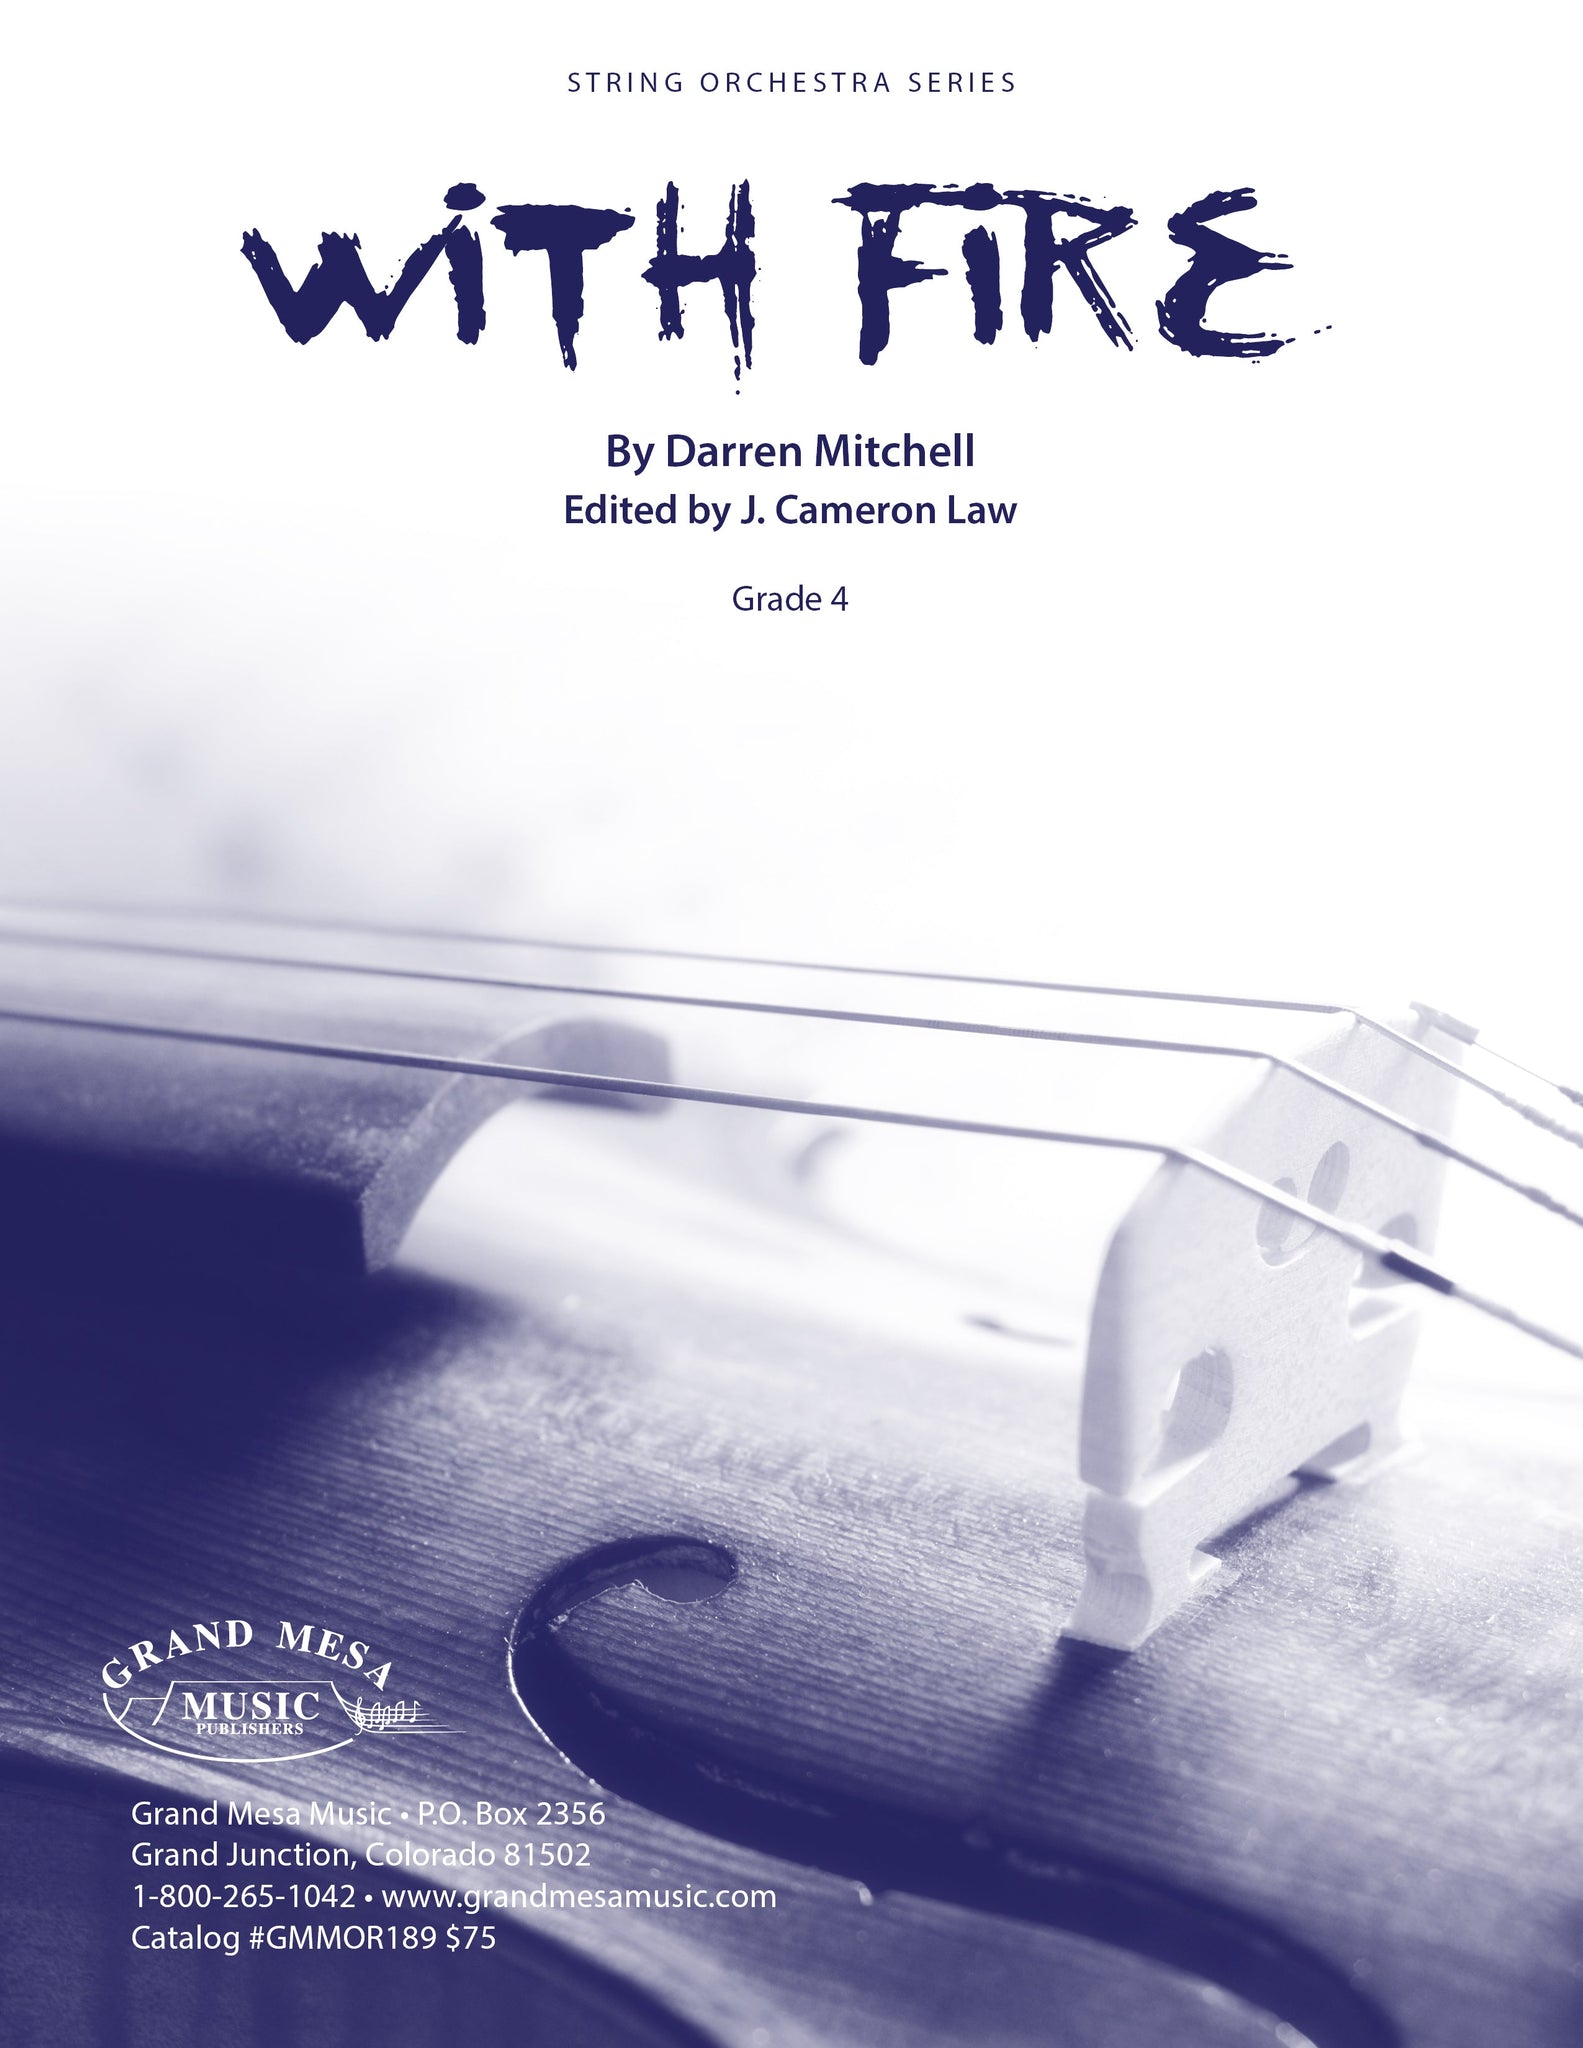 Strings sheet music cover of With Fire, composed by Darren Mitchell.